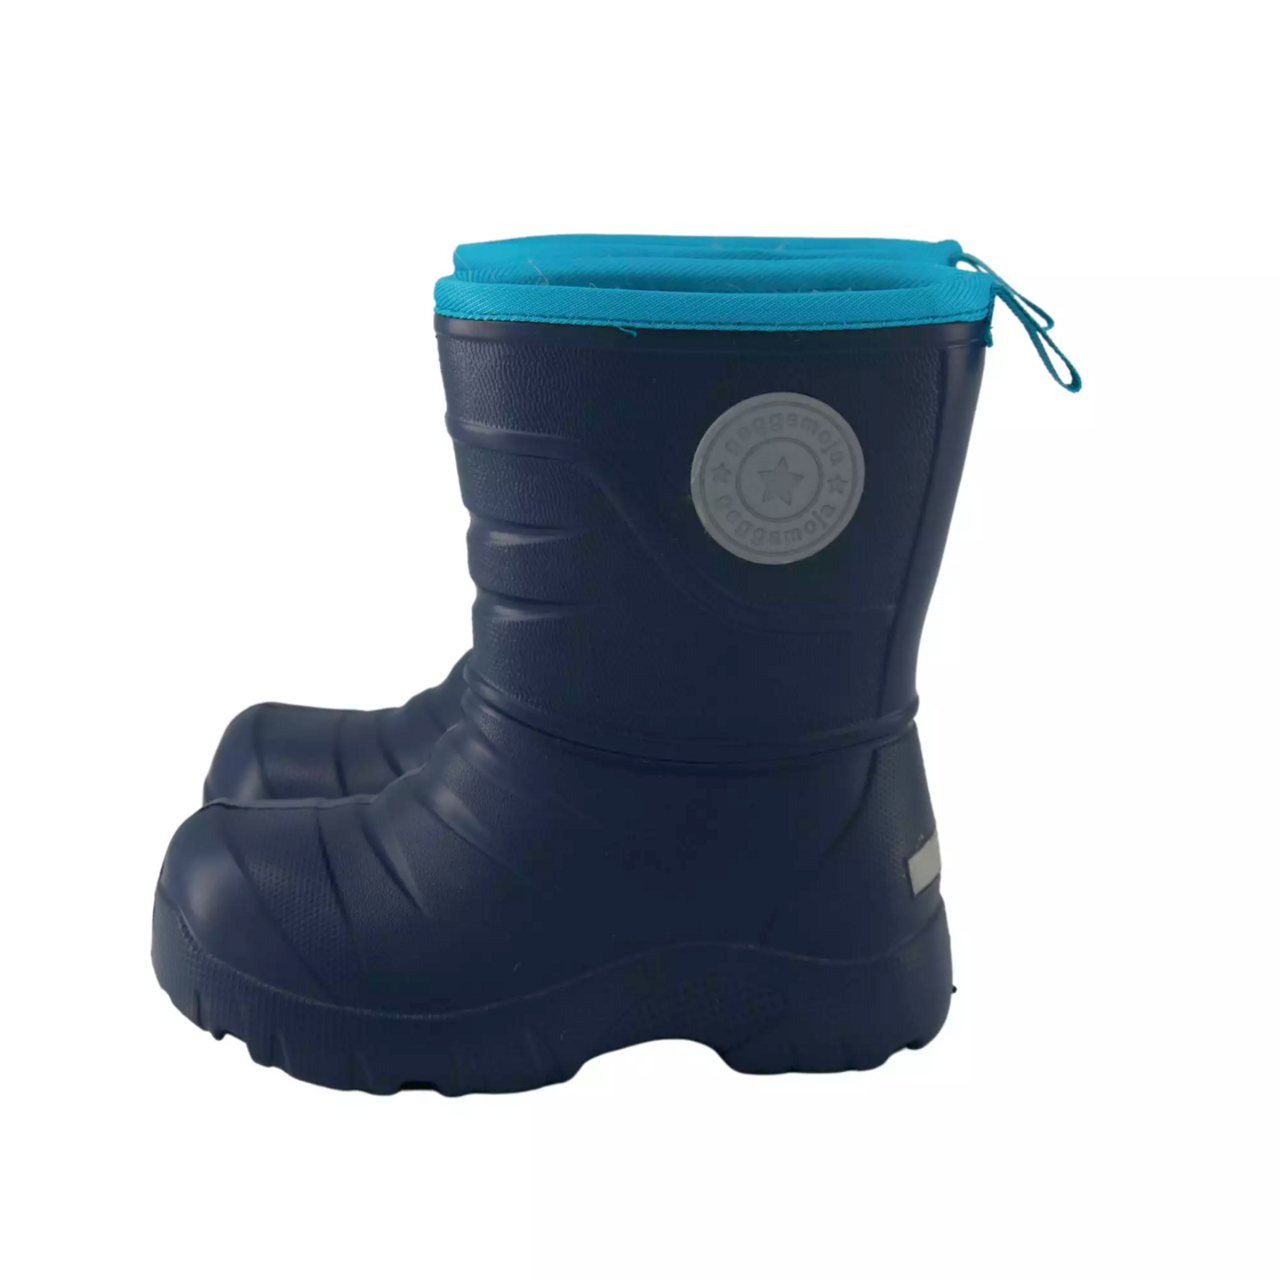 All-weather Boot Navy  22 (14,2 cm)